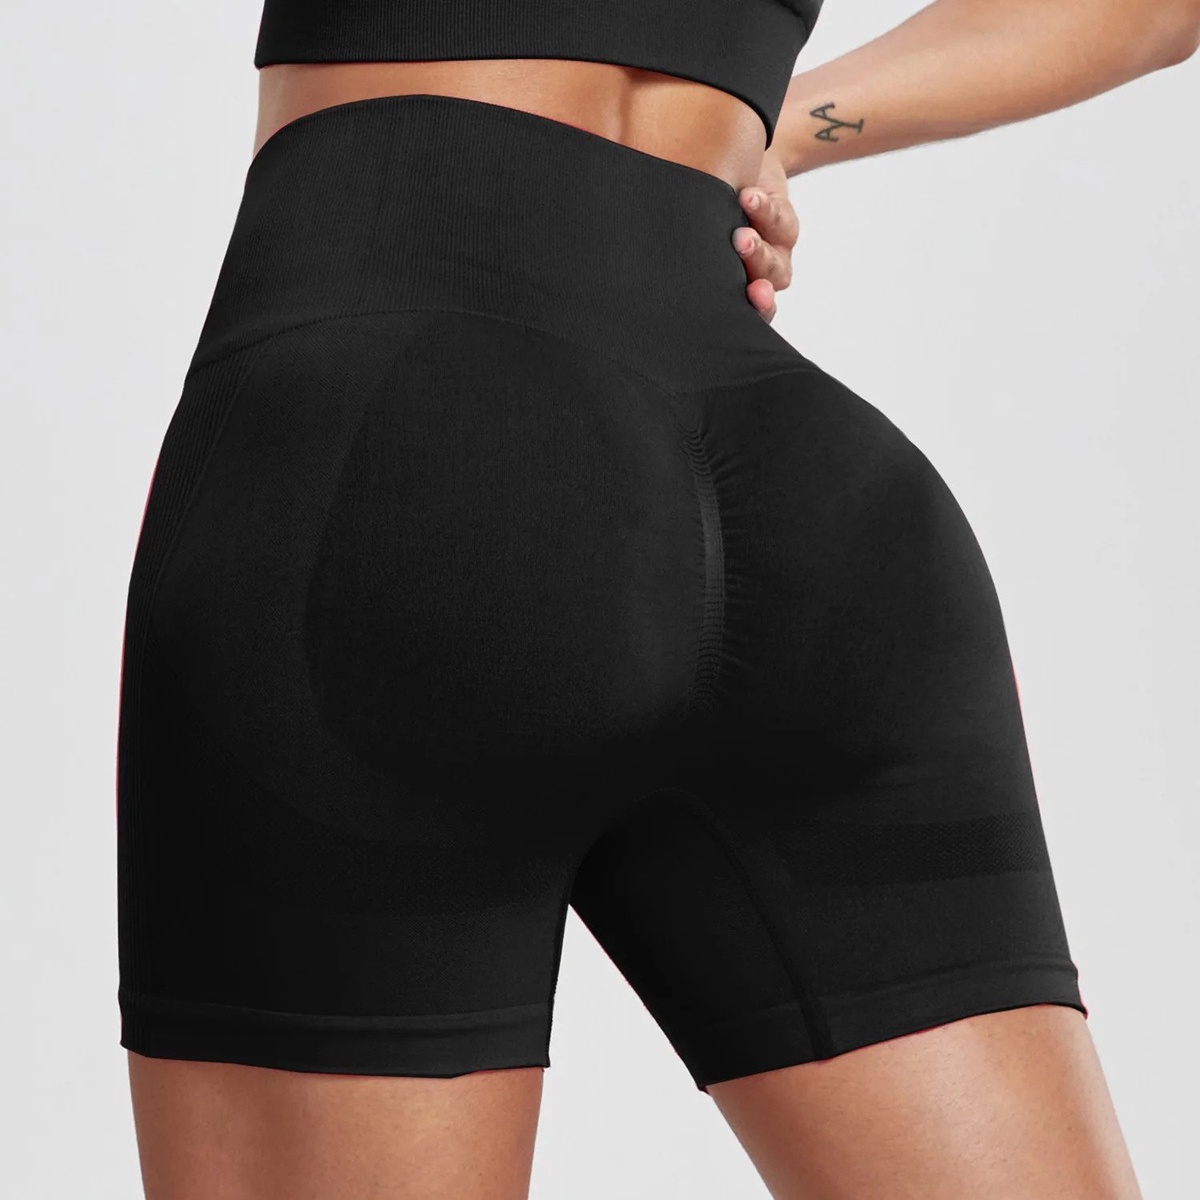 How To Buy The Perfect Scrunch Bum Gym Shorts